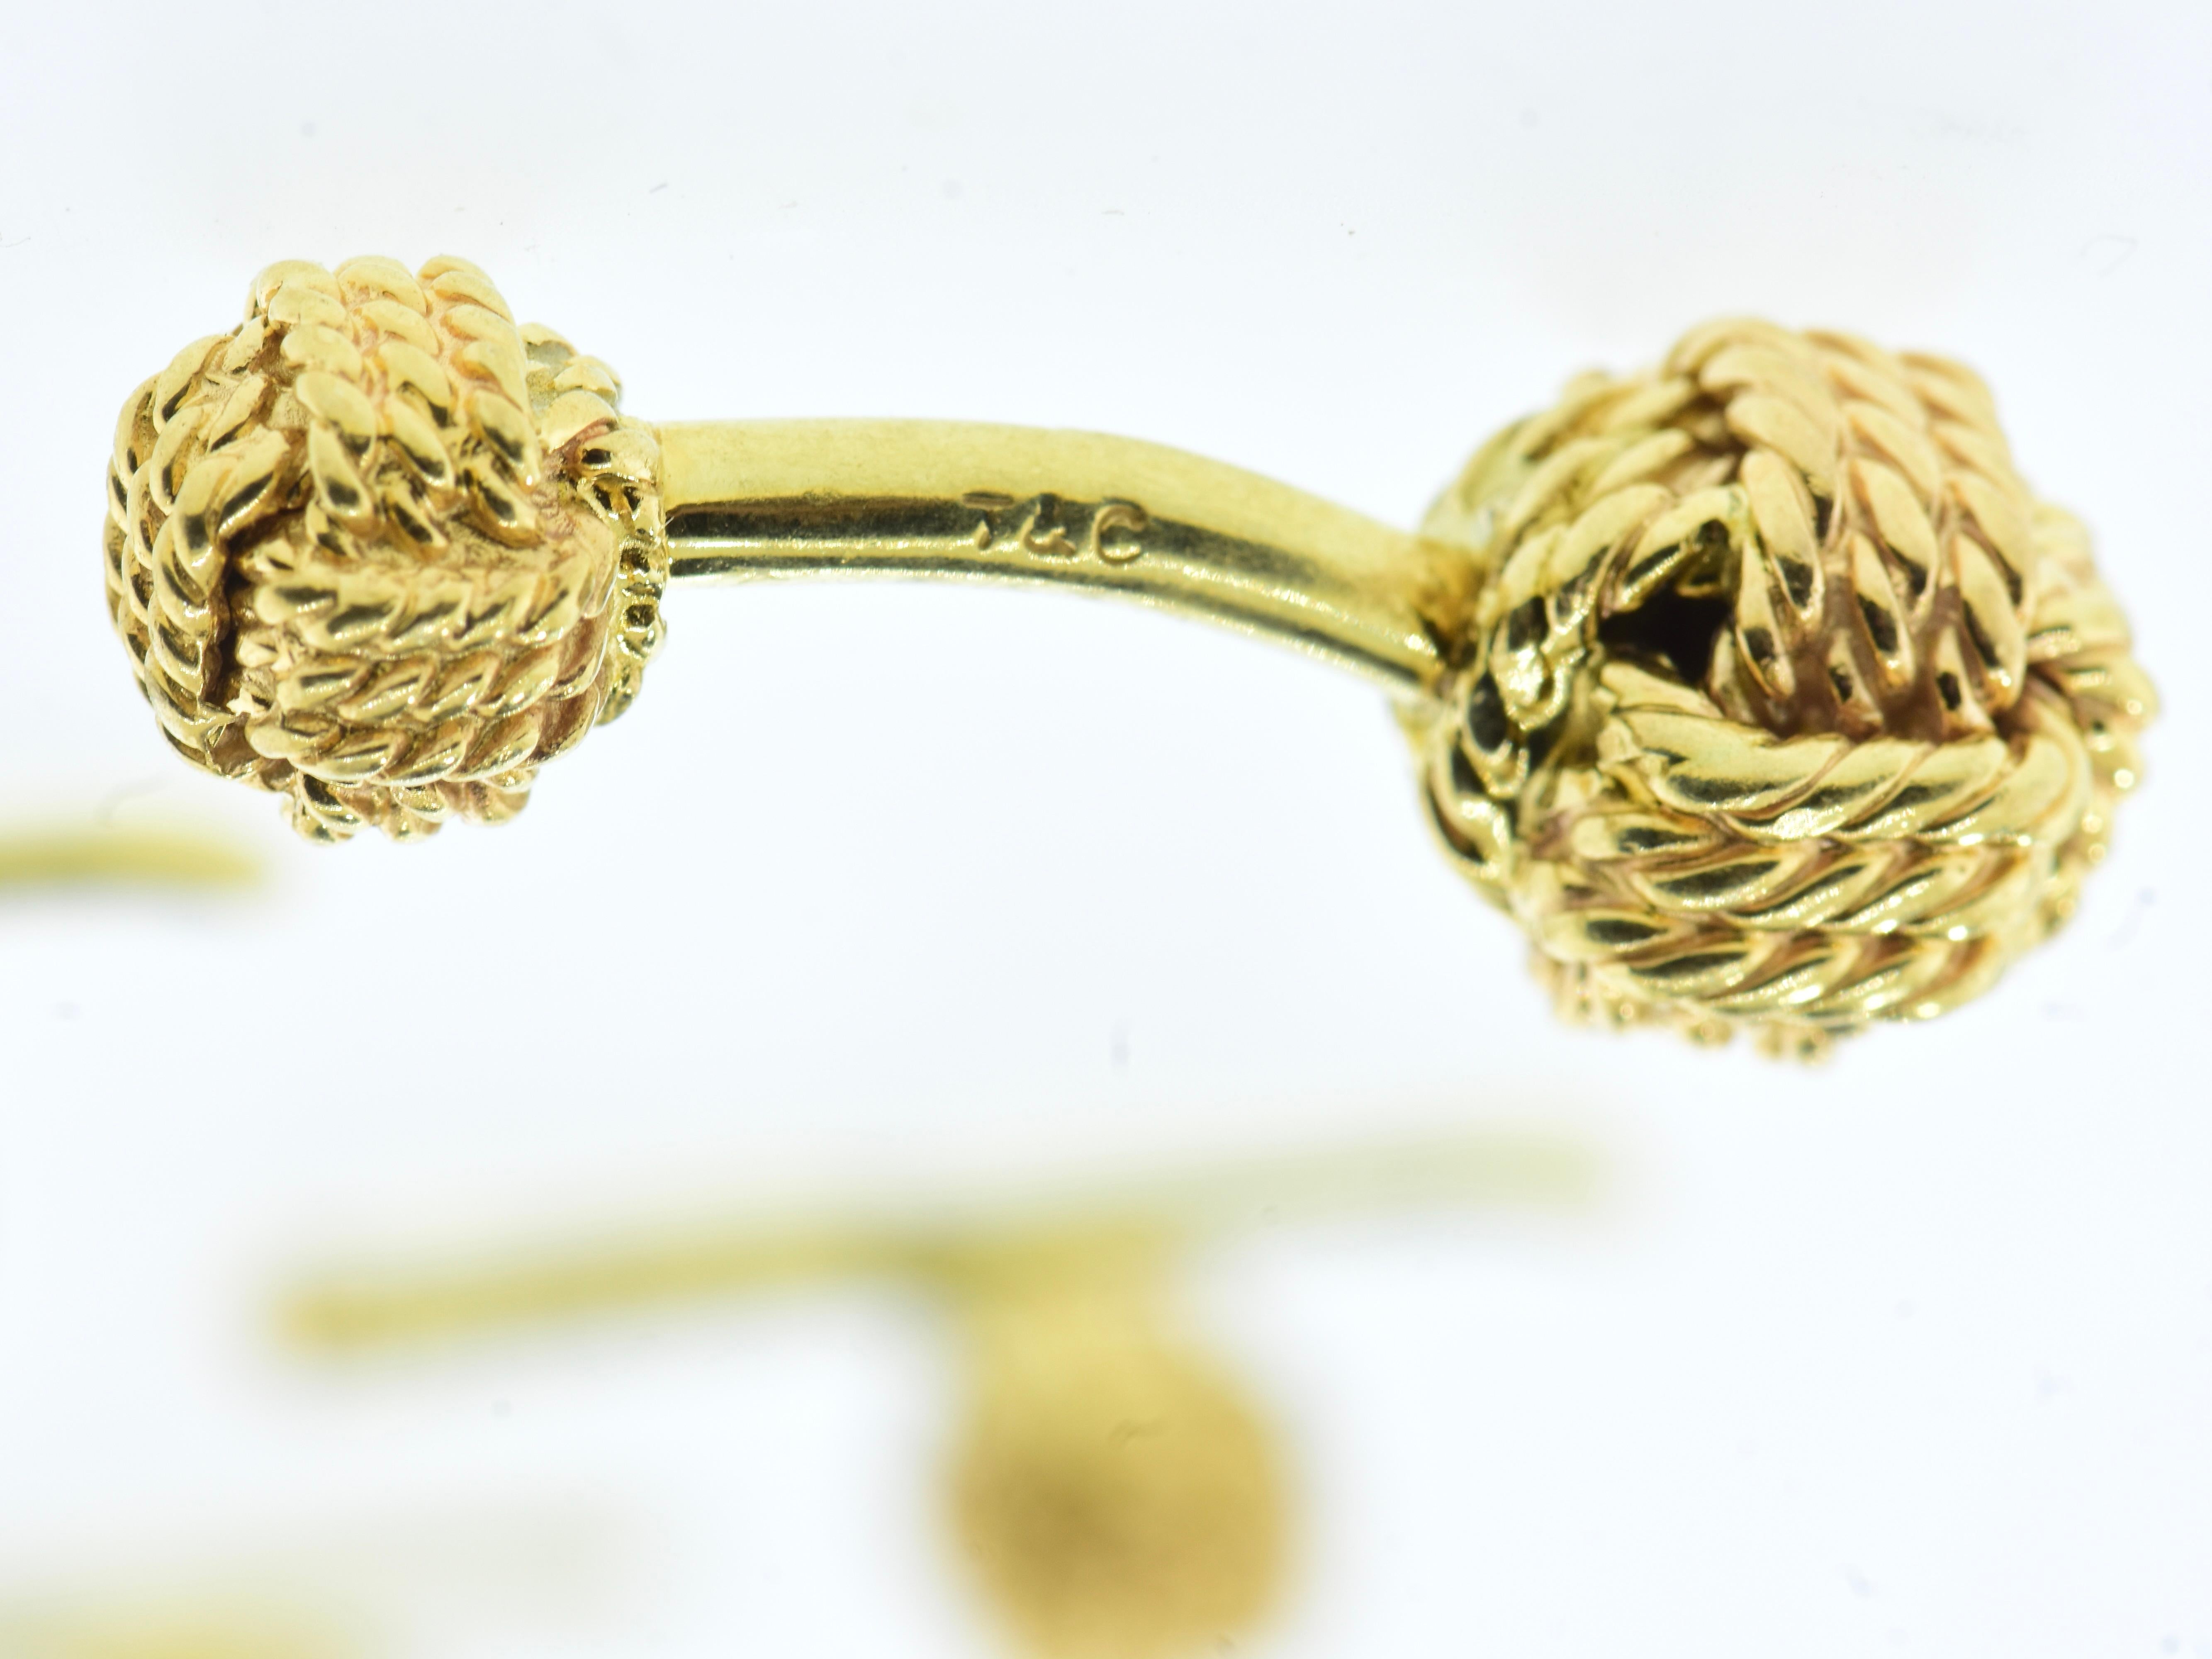 Tiffany & Co. Yellow Gold Cuff & Stud Set in a Love Knot Motif, Vintage, c. 1970 For Sale 4